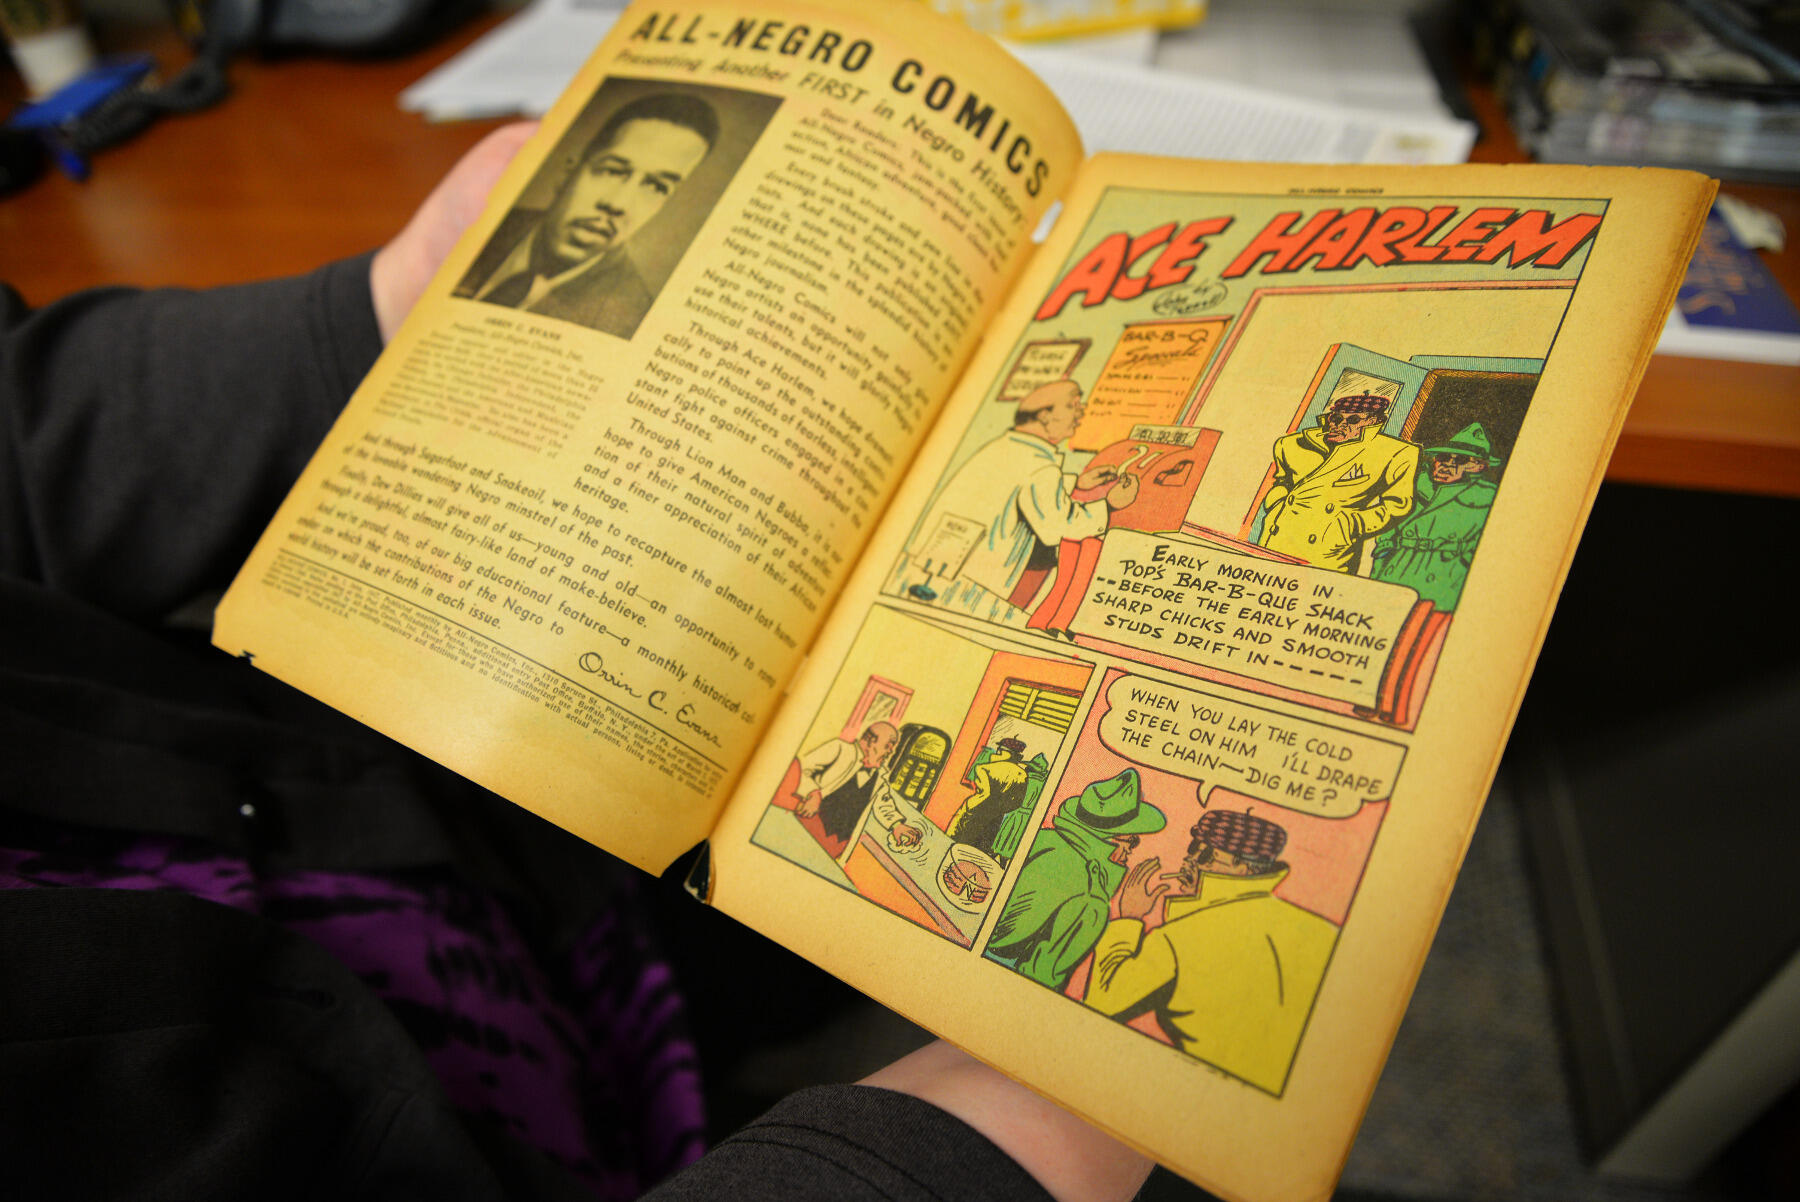 Inside the comic is a letter to the reader from publisher Orrin C. Evans and several stories, including detective story "Ace Harlem," that emphasized positive portrayals of African-American characters.
